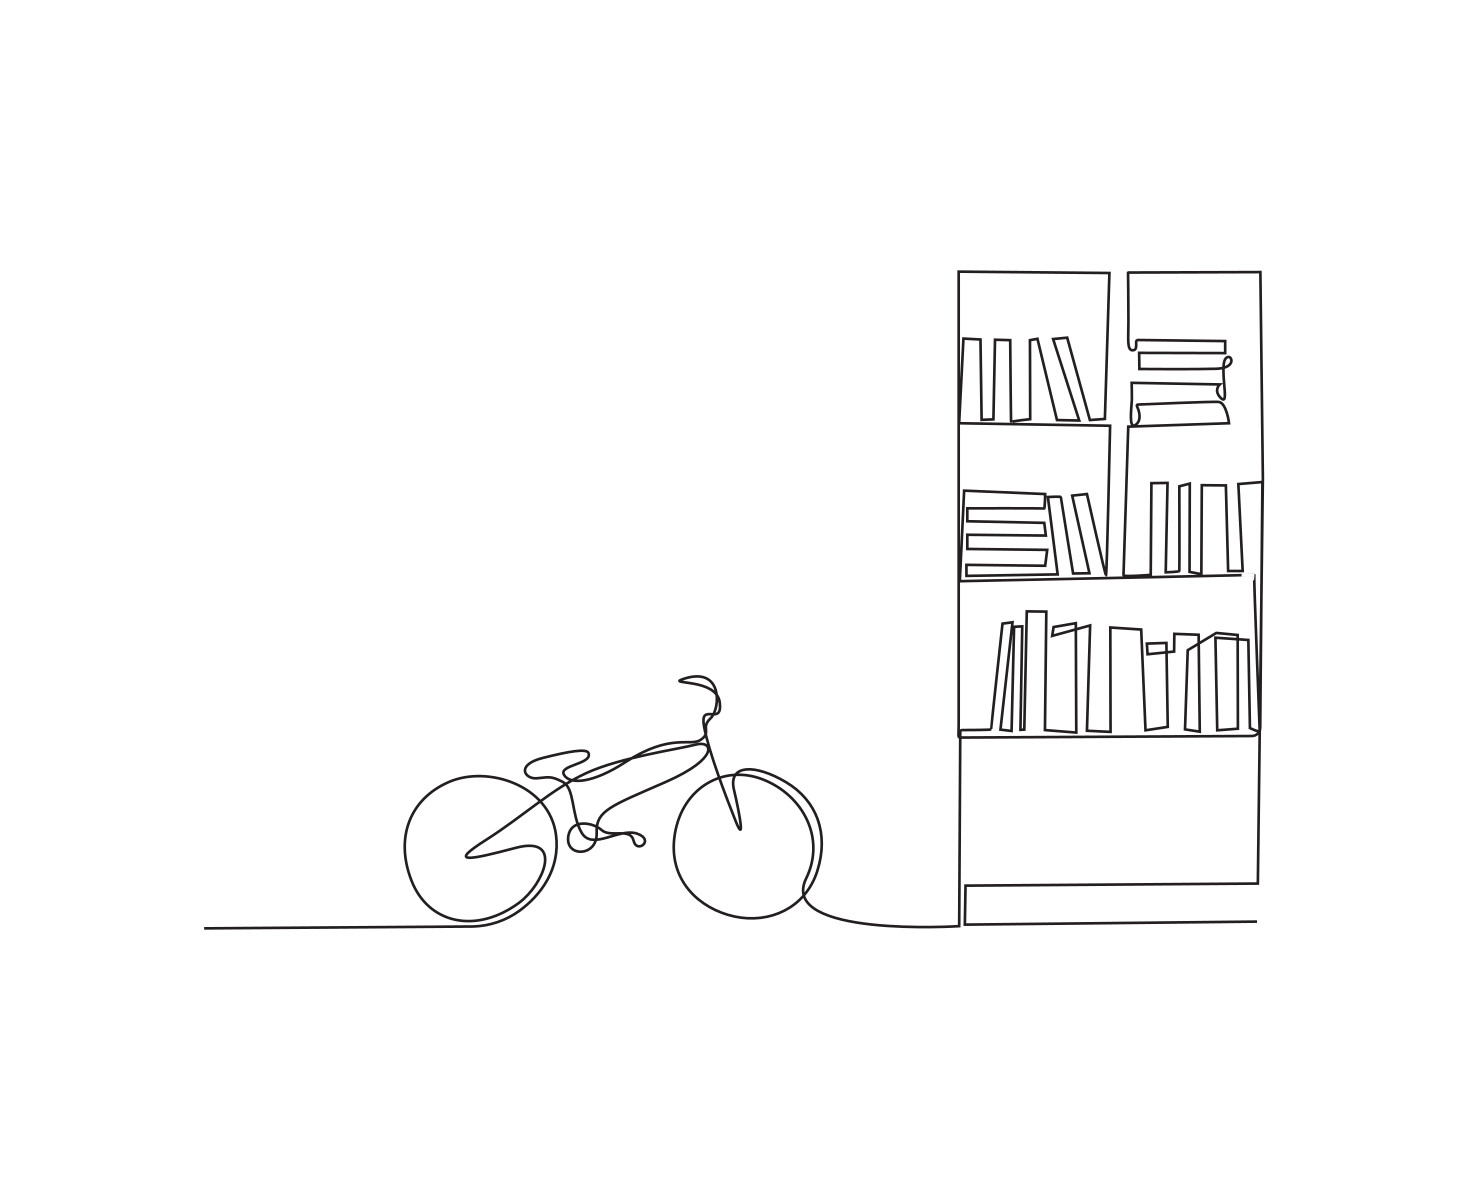 Learn to ride a bicycle is very different than learning from books - personal knowledge management